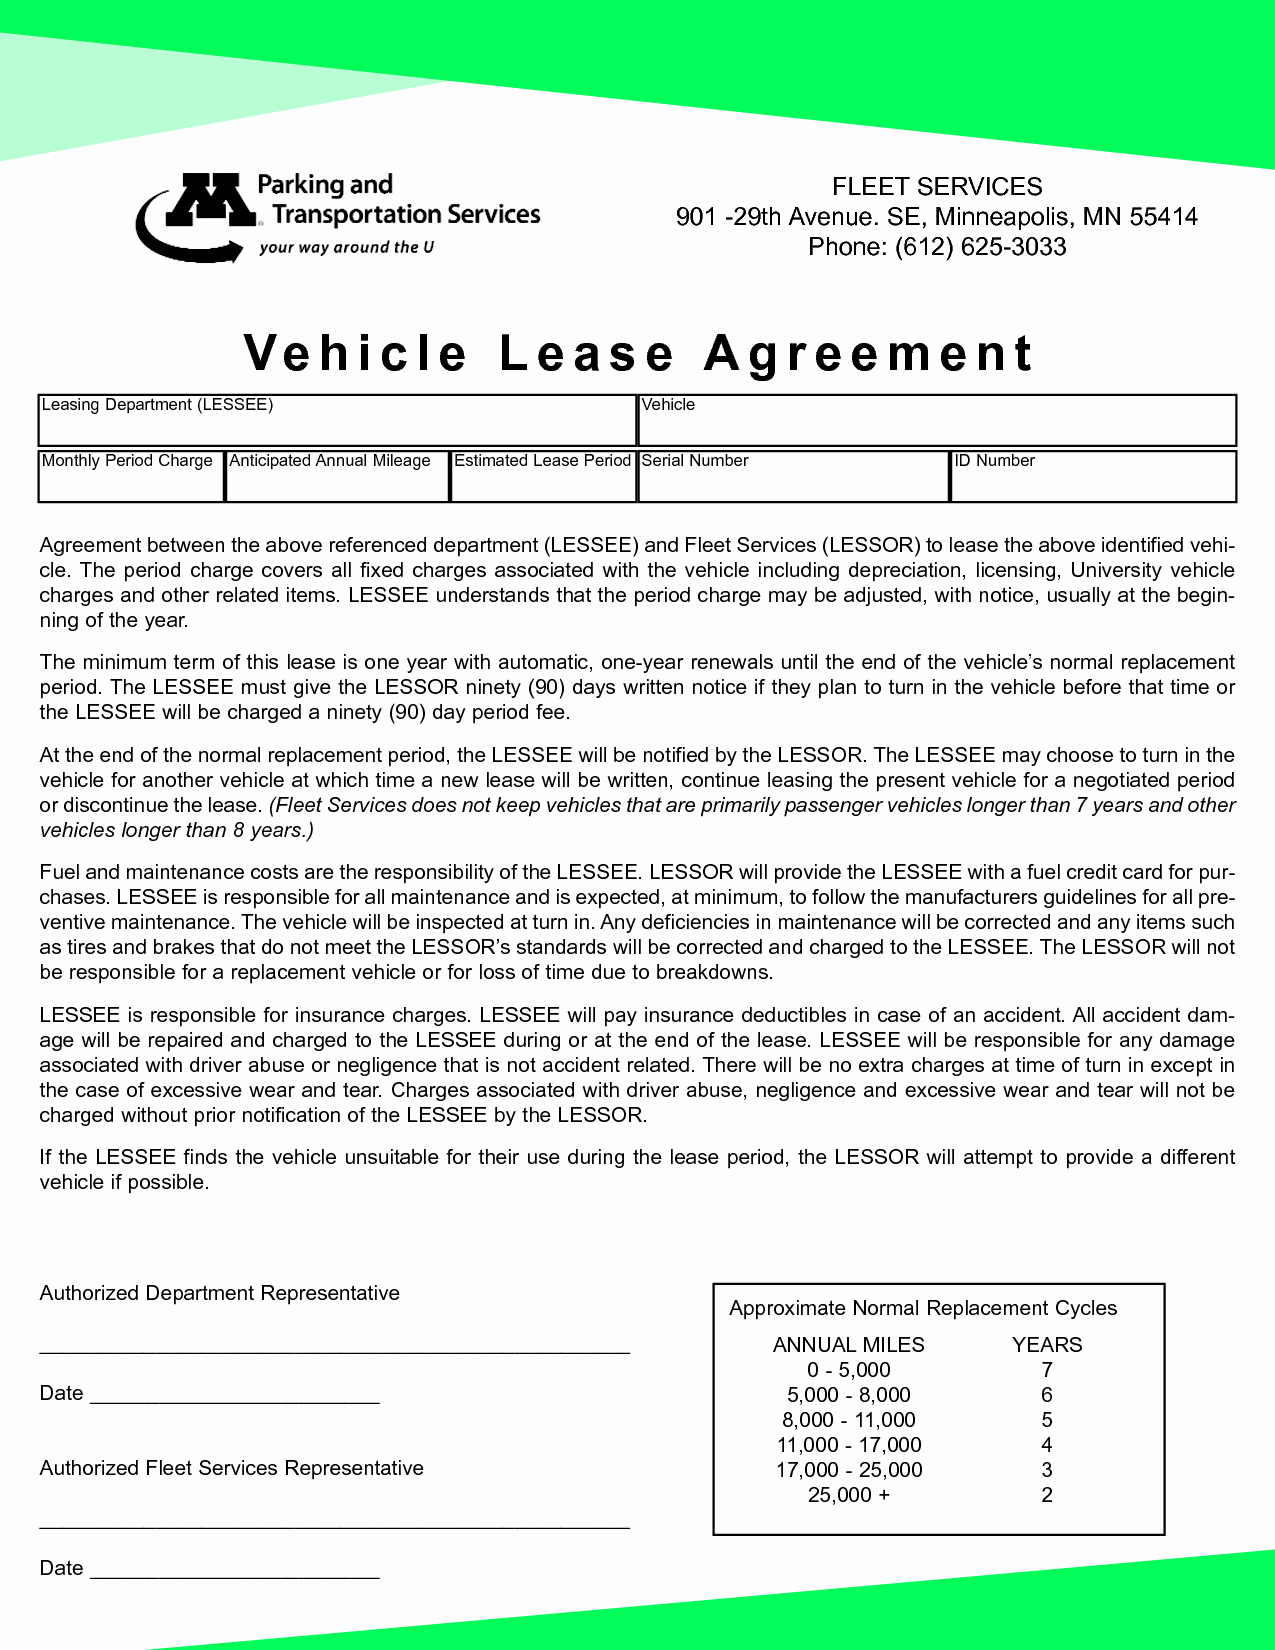 Vehicle Lease Agreement